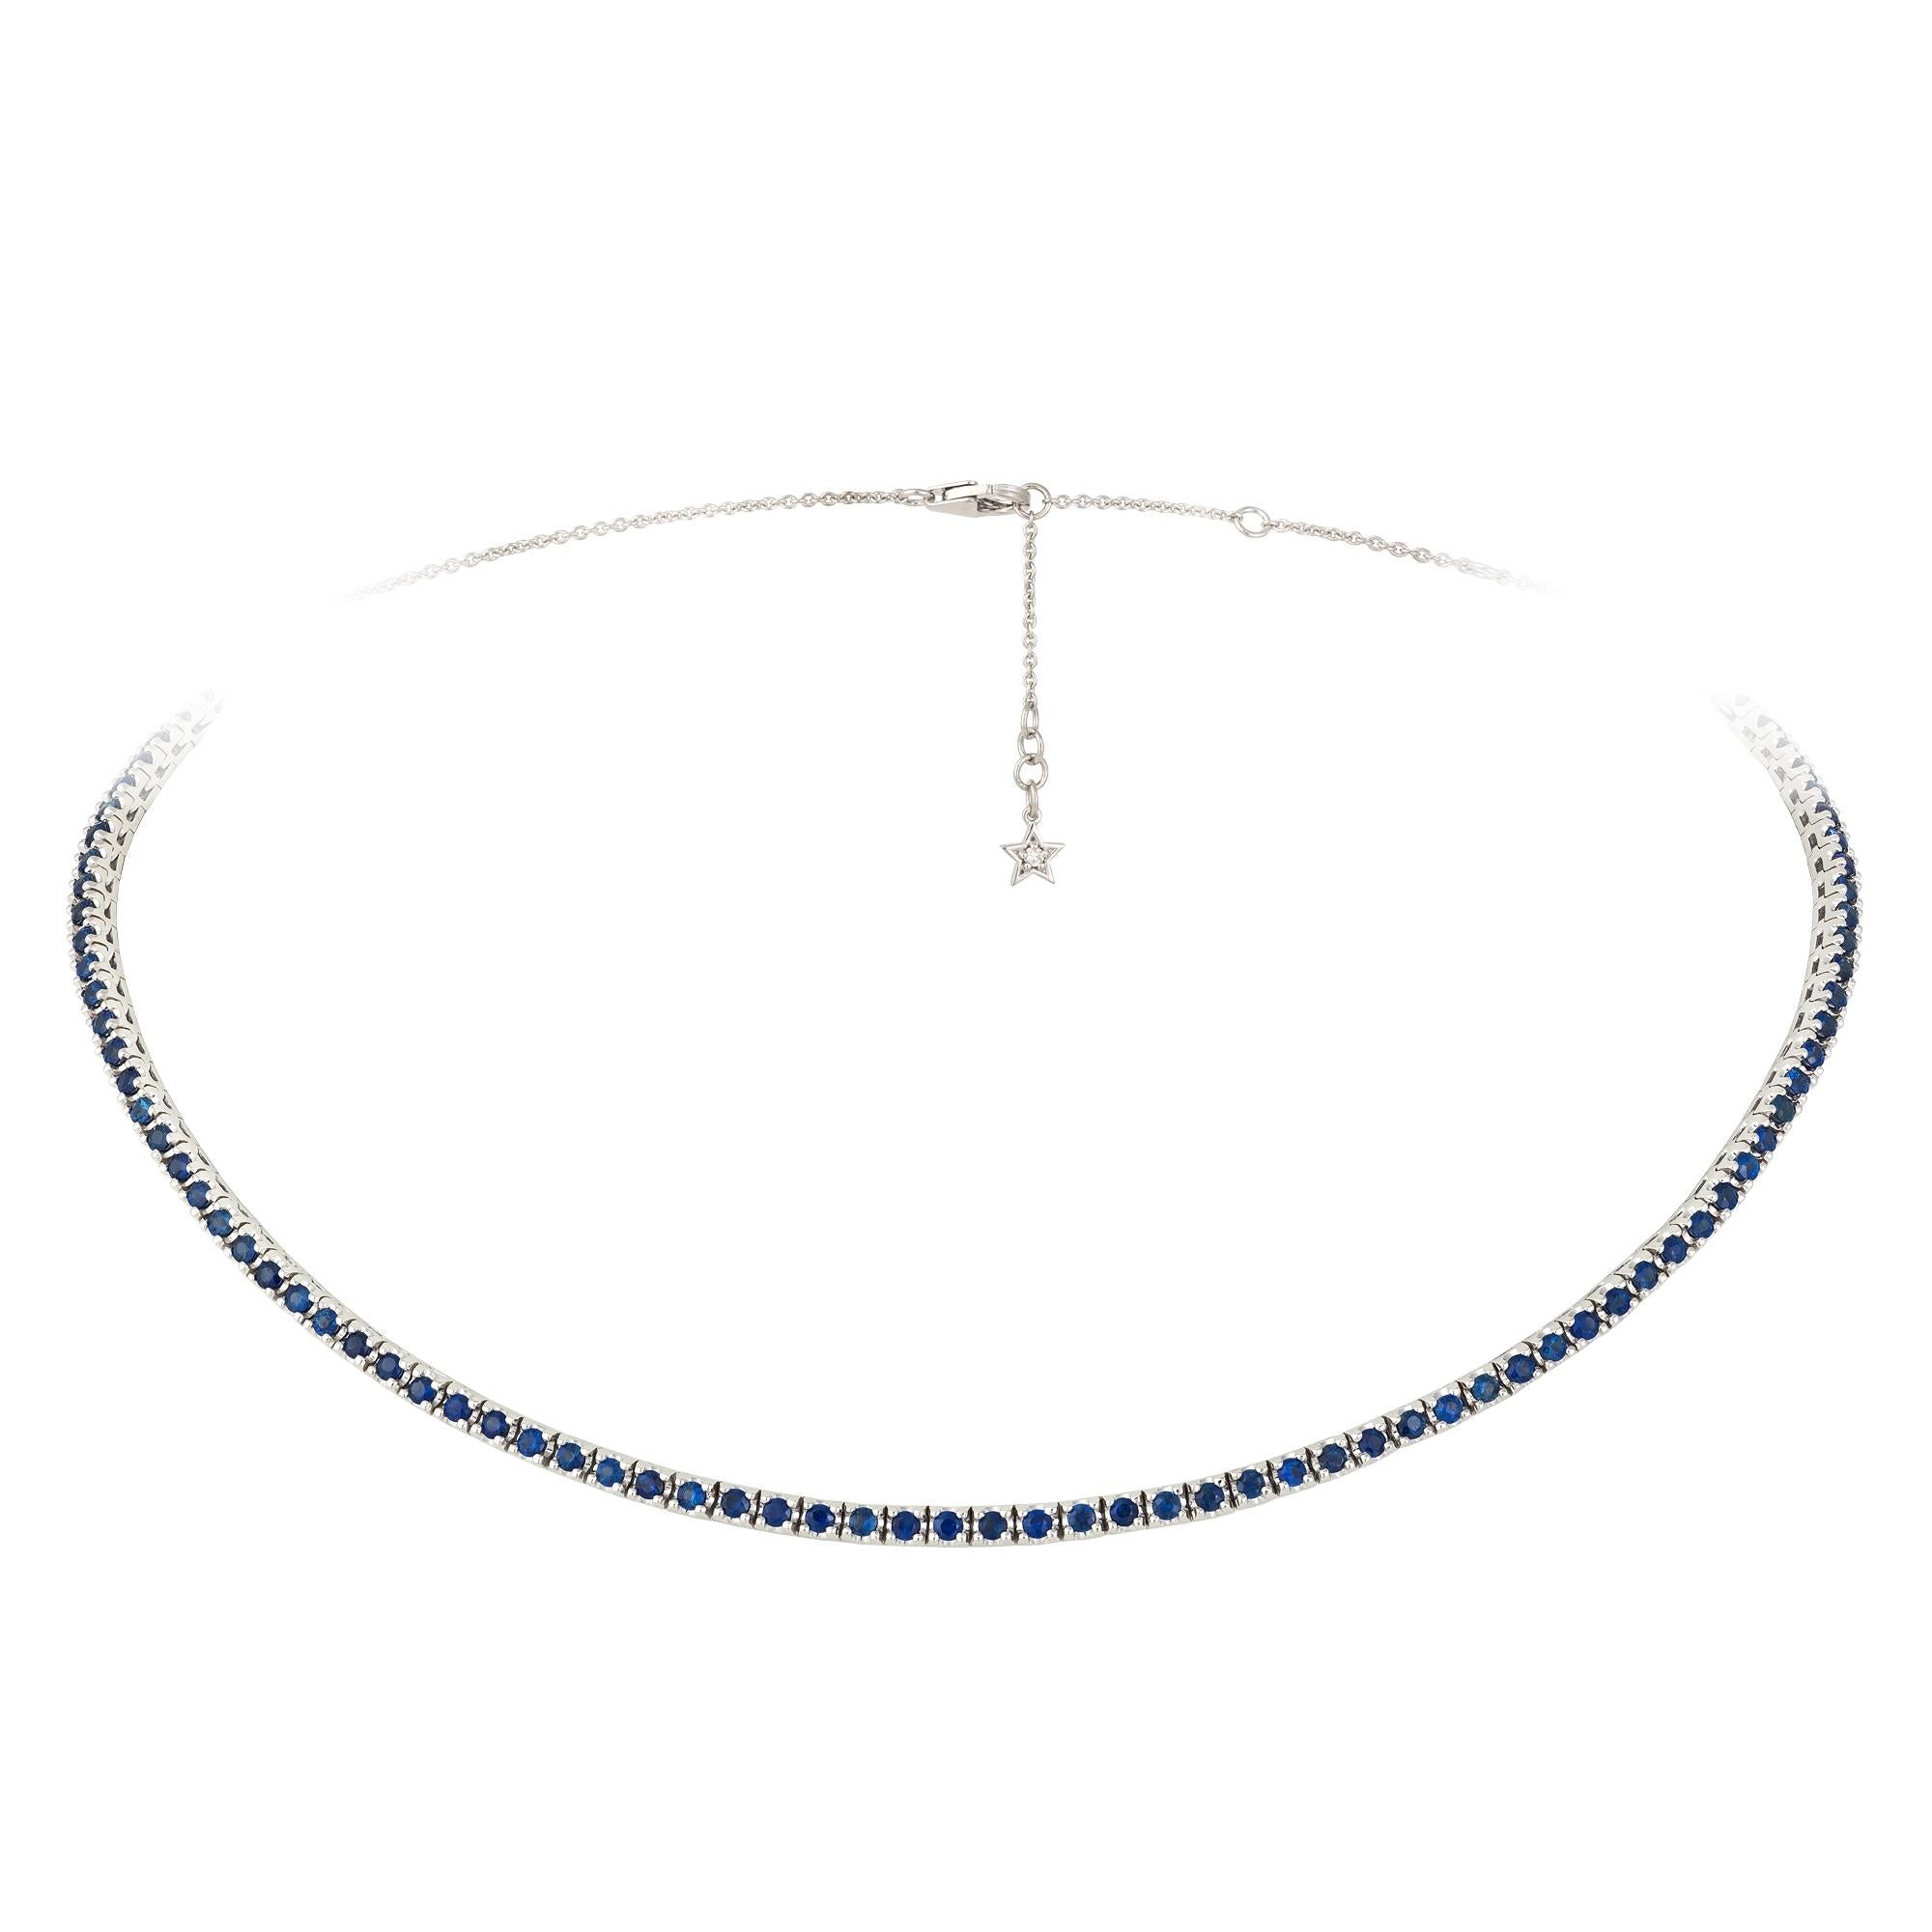 Necklace White Gold 18 K 
Diamond  0.03 Cts/1 Pcs
Blue Sapphire 2.50 Cts/81 Pcs

Weight 12,57 grams

With a heritage of ancient fine Swiss jewelry traditions, NATKINA is a Geneva based jewellery brand, which creates modern jewellery masterpieces